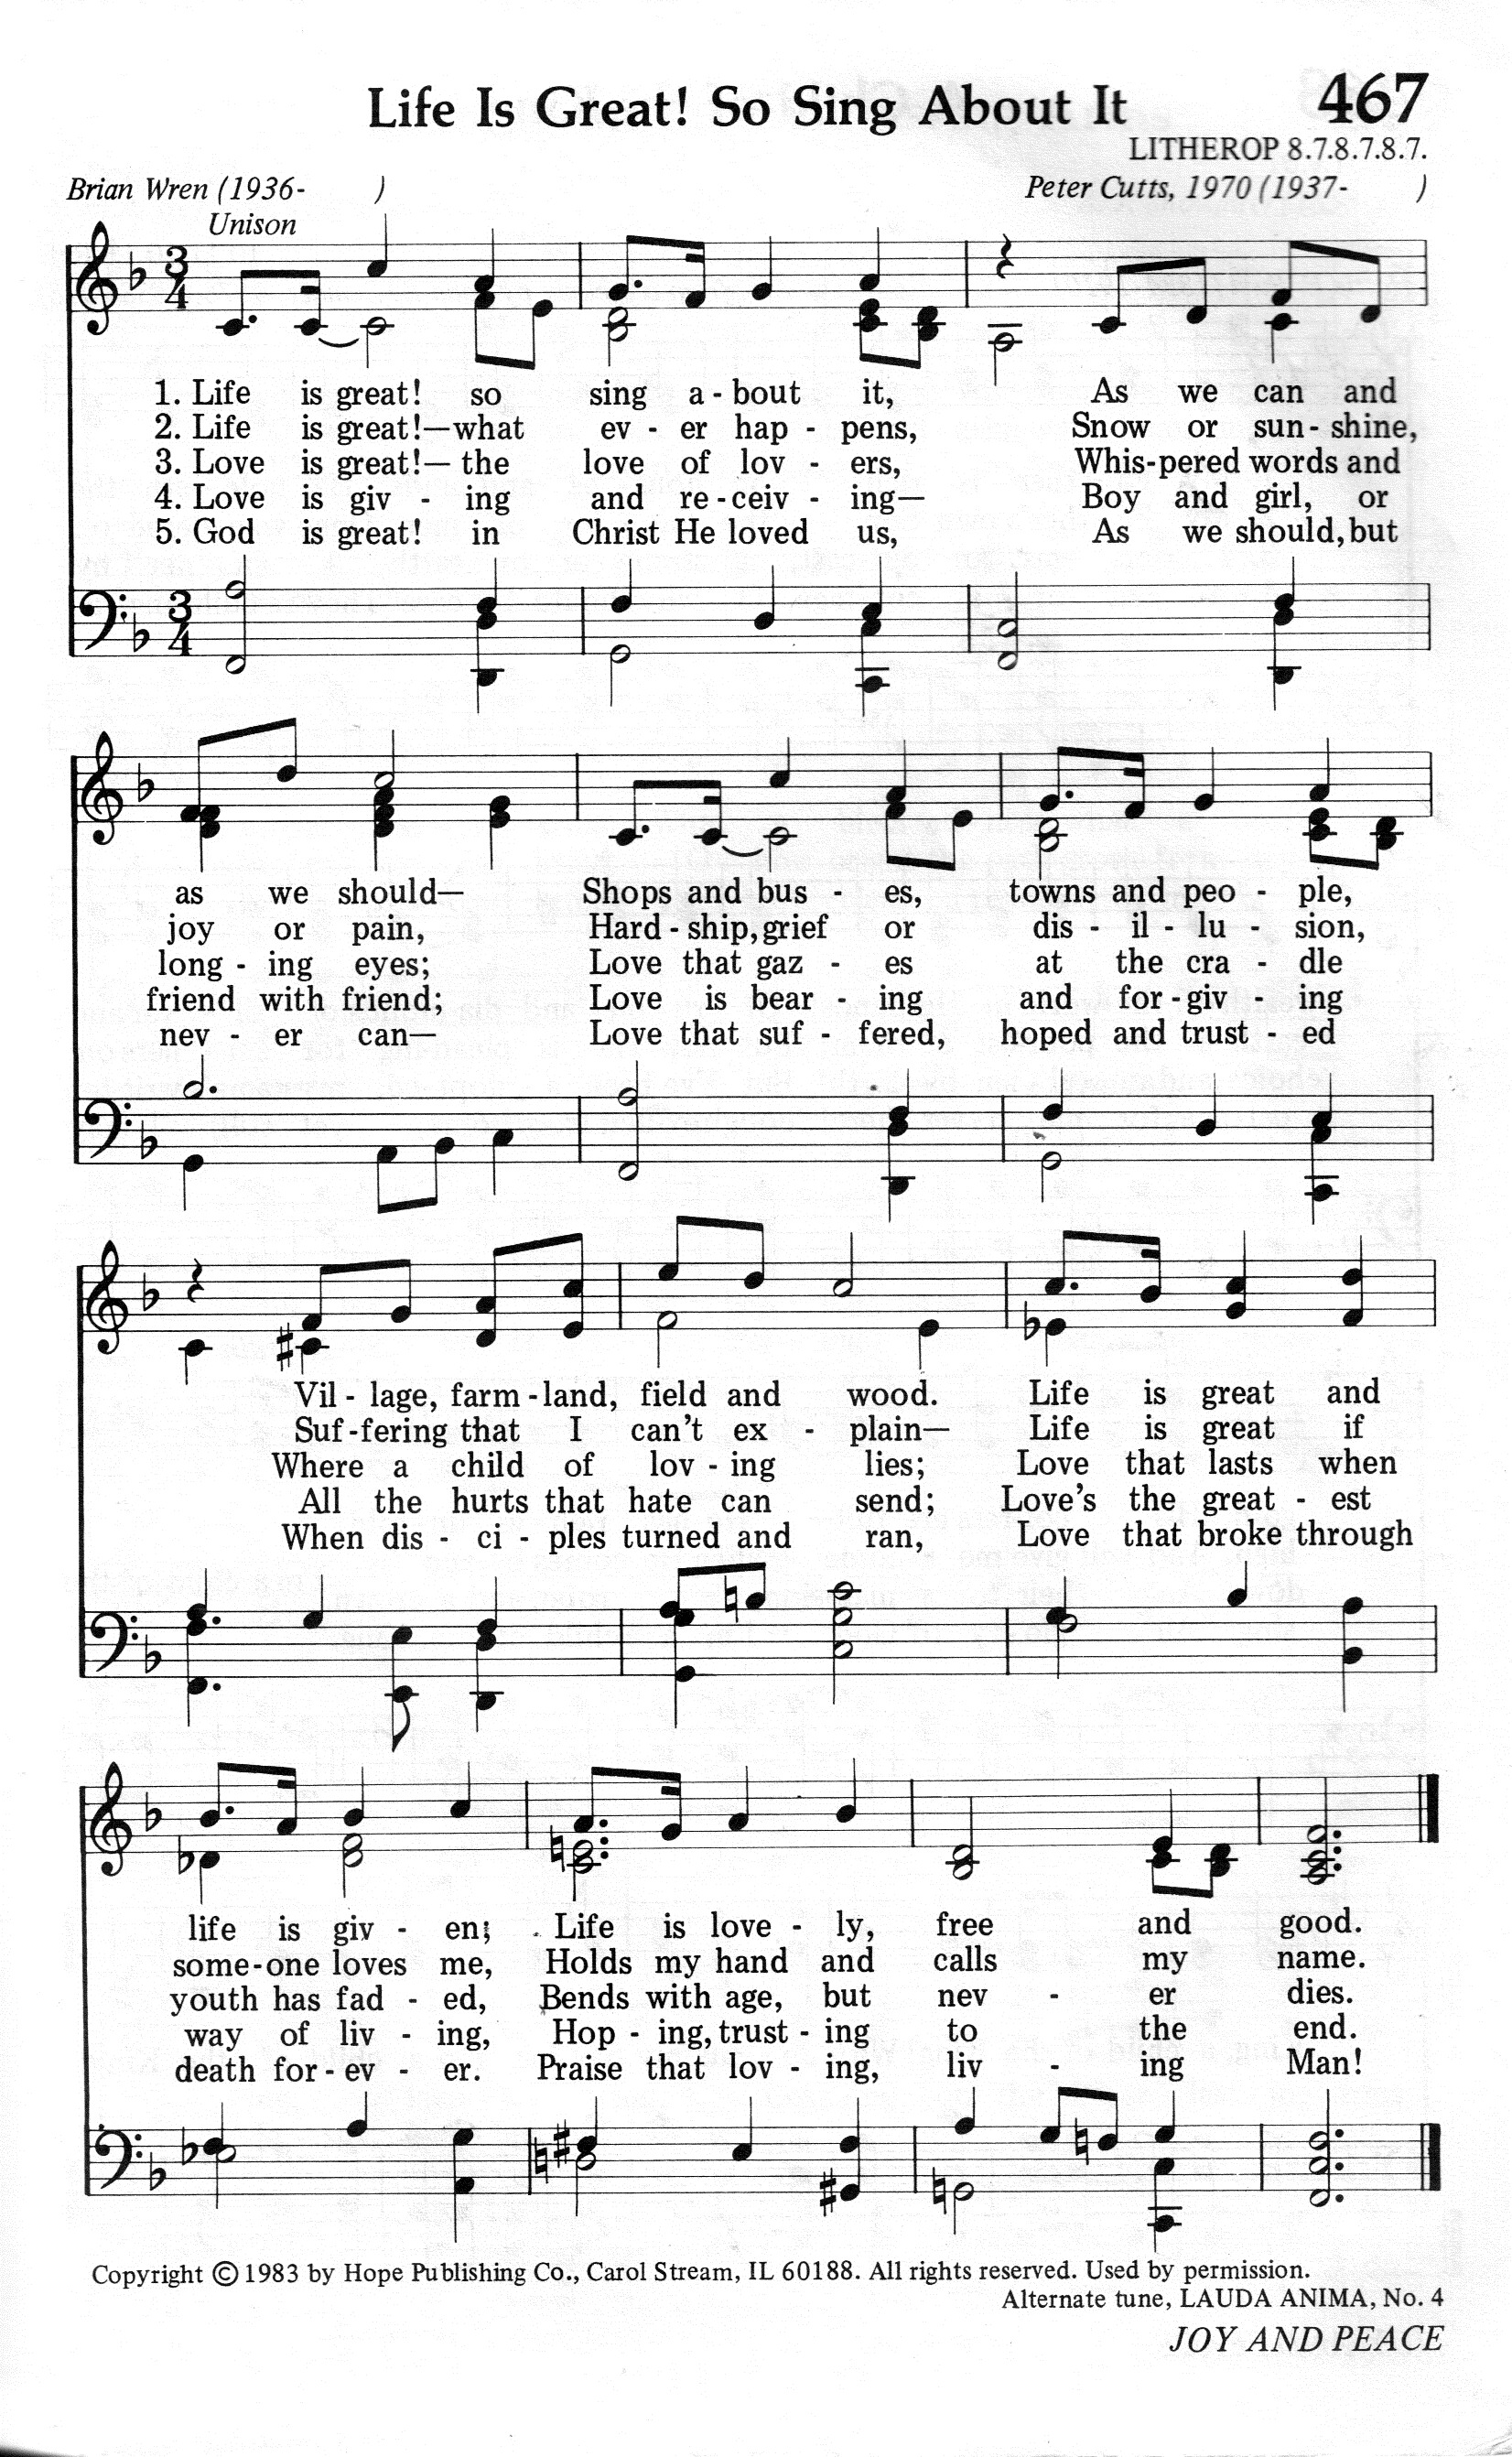 468.A Child of the King-695HYMN